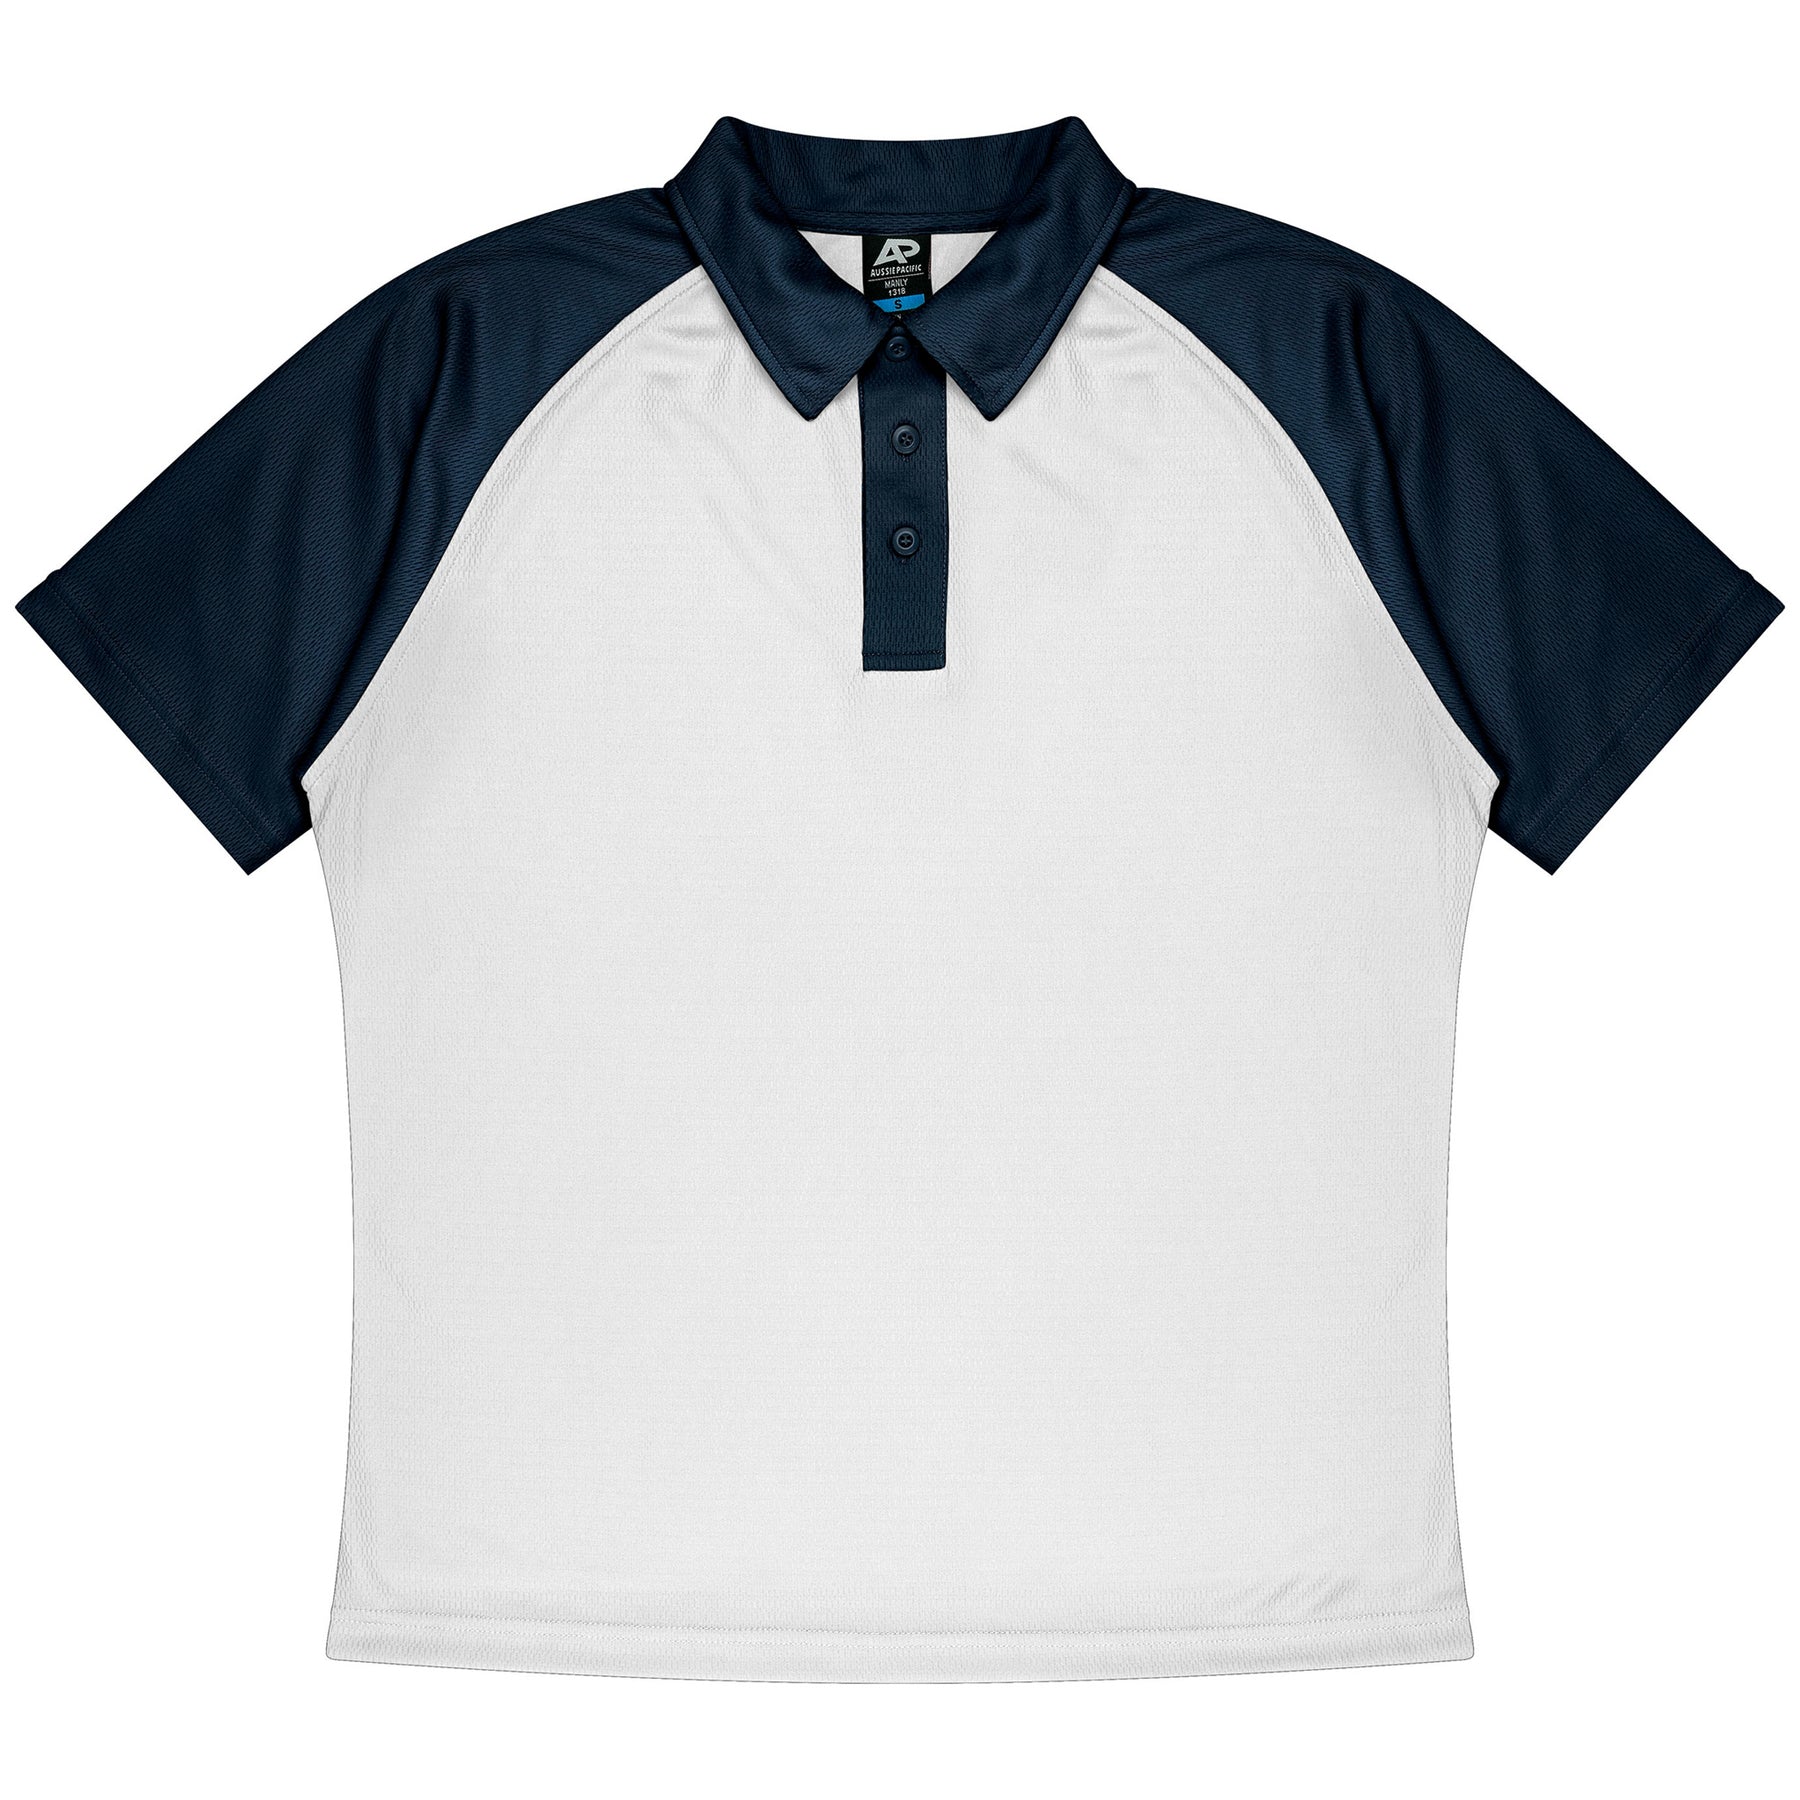 manly kids polo in white navy